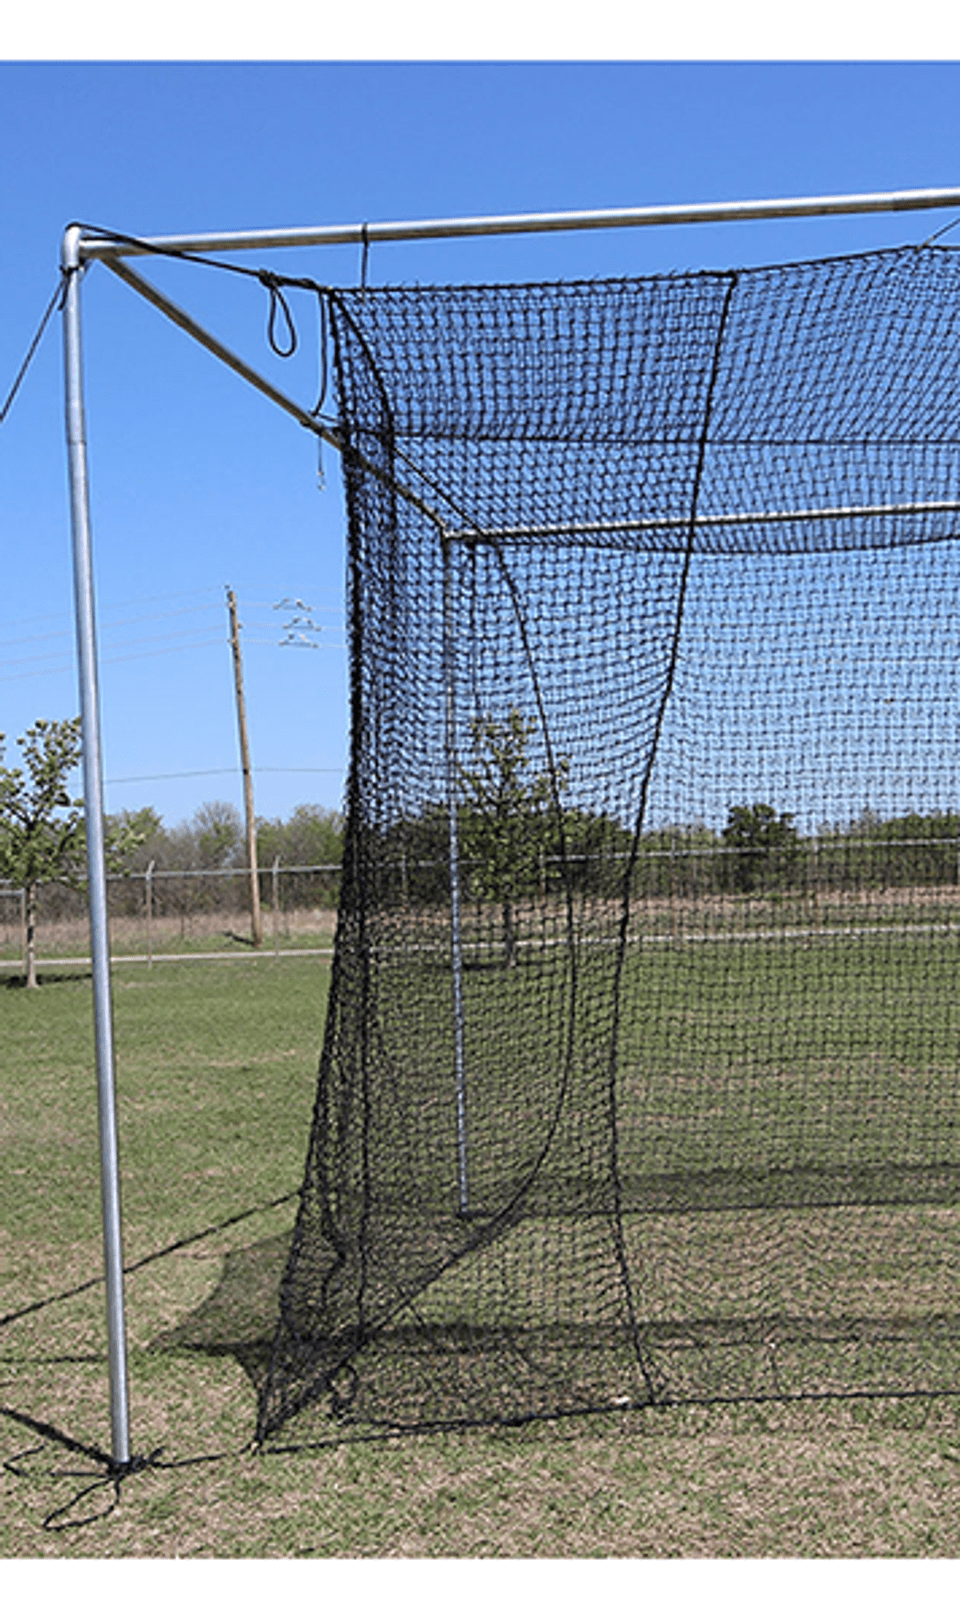 Cimarron Sports Batting Cage Net #60 Twisted Poly Batting Cage Net | Cimarron Sports